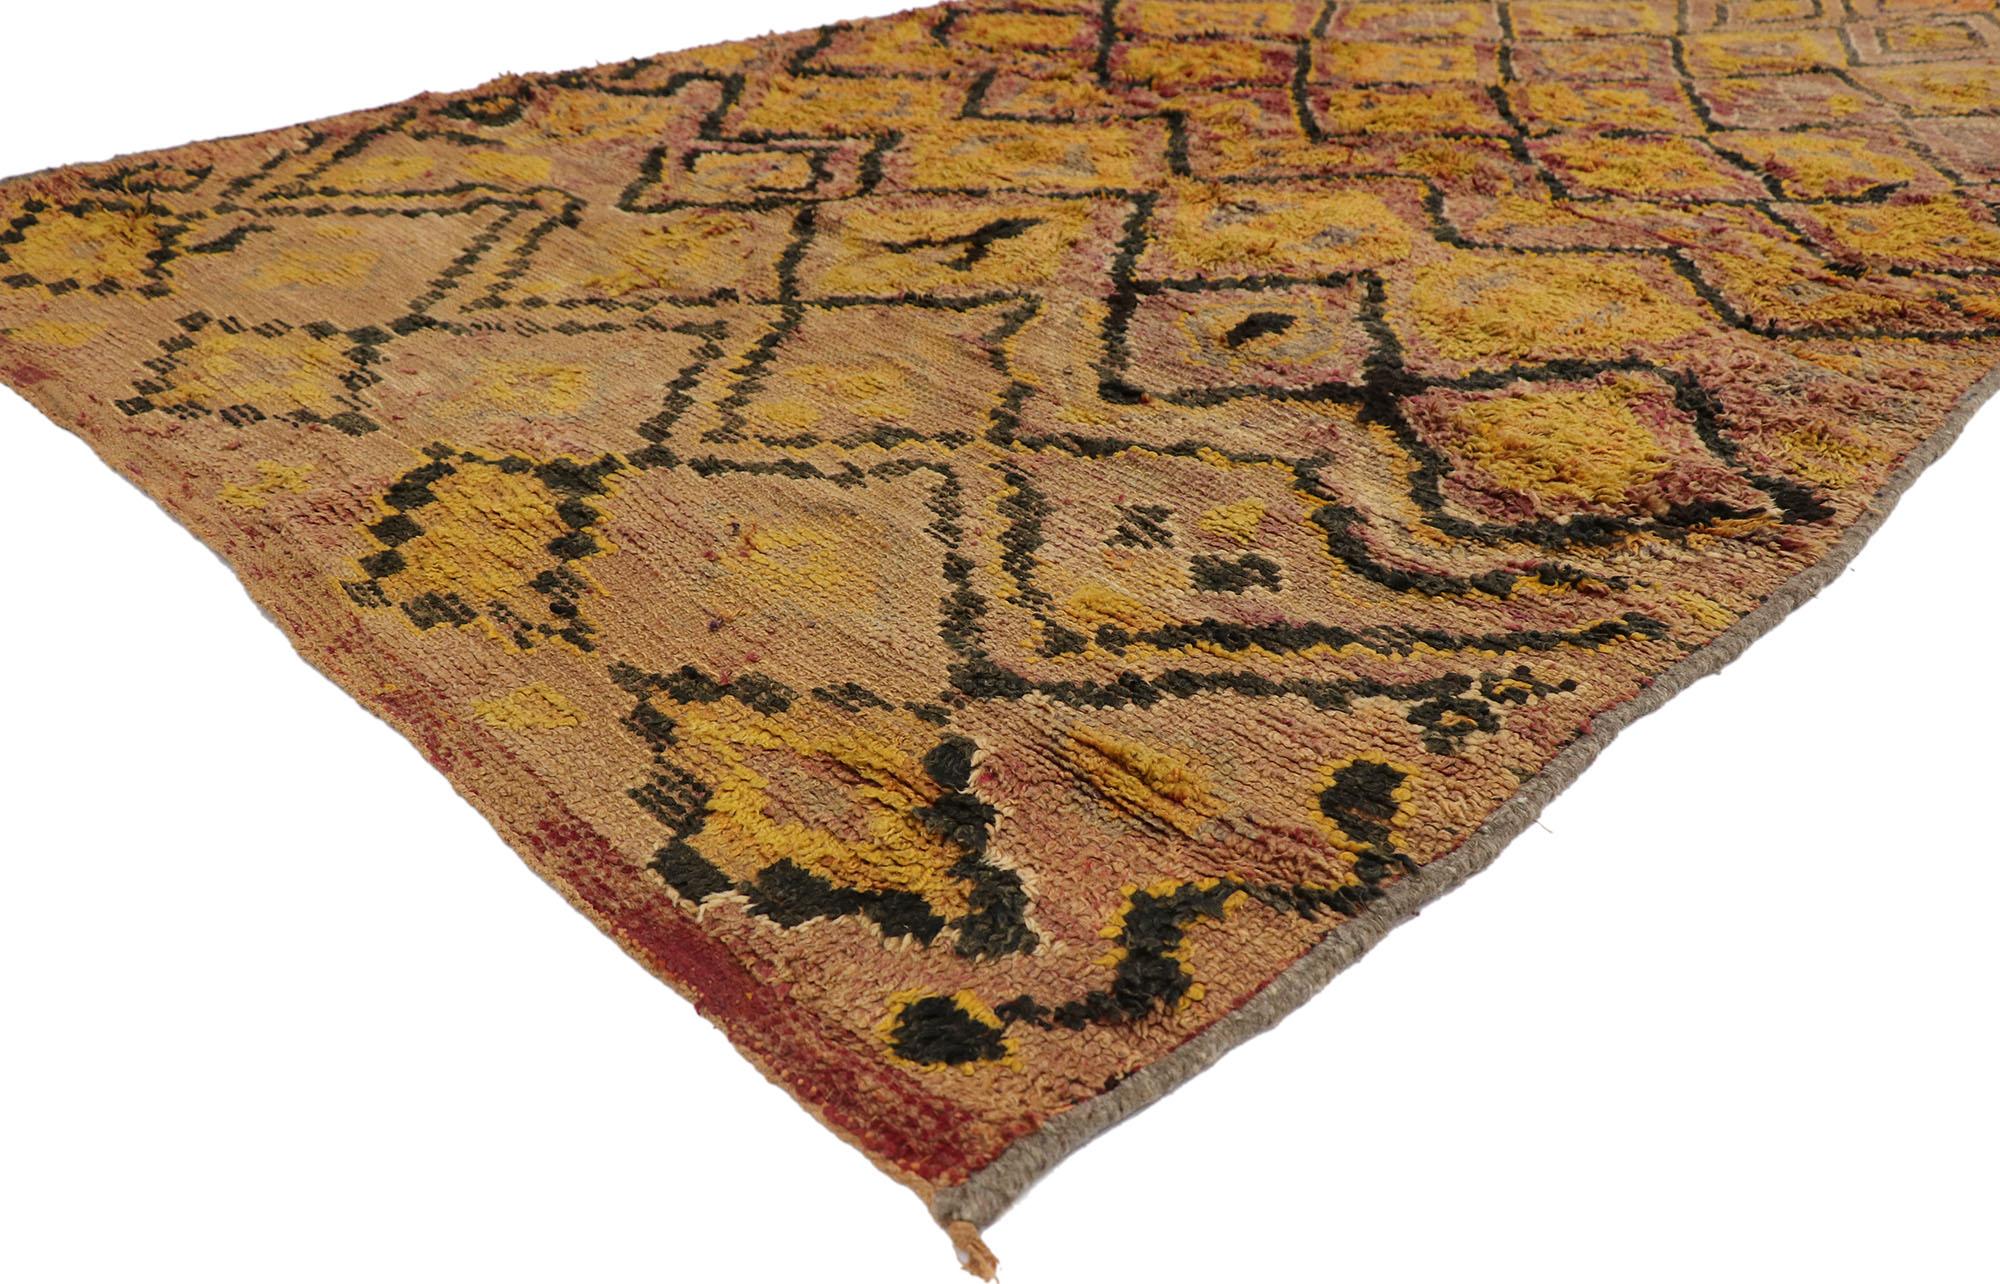 21303 Distressed Vintage Boujad Moroccan Rug, 05'11 x 10'00. Embark on a journey into the captivating charm of modern rustic design with this hand-knotted wool vintage Moroccan rug, a treasure from the vibrant city of Boujad nestled within the